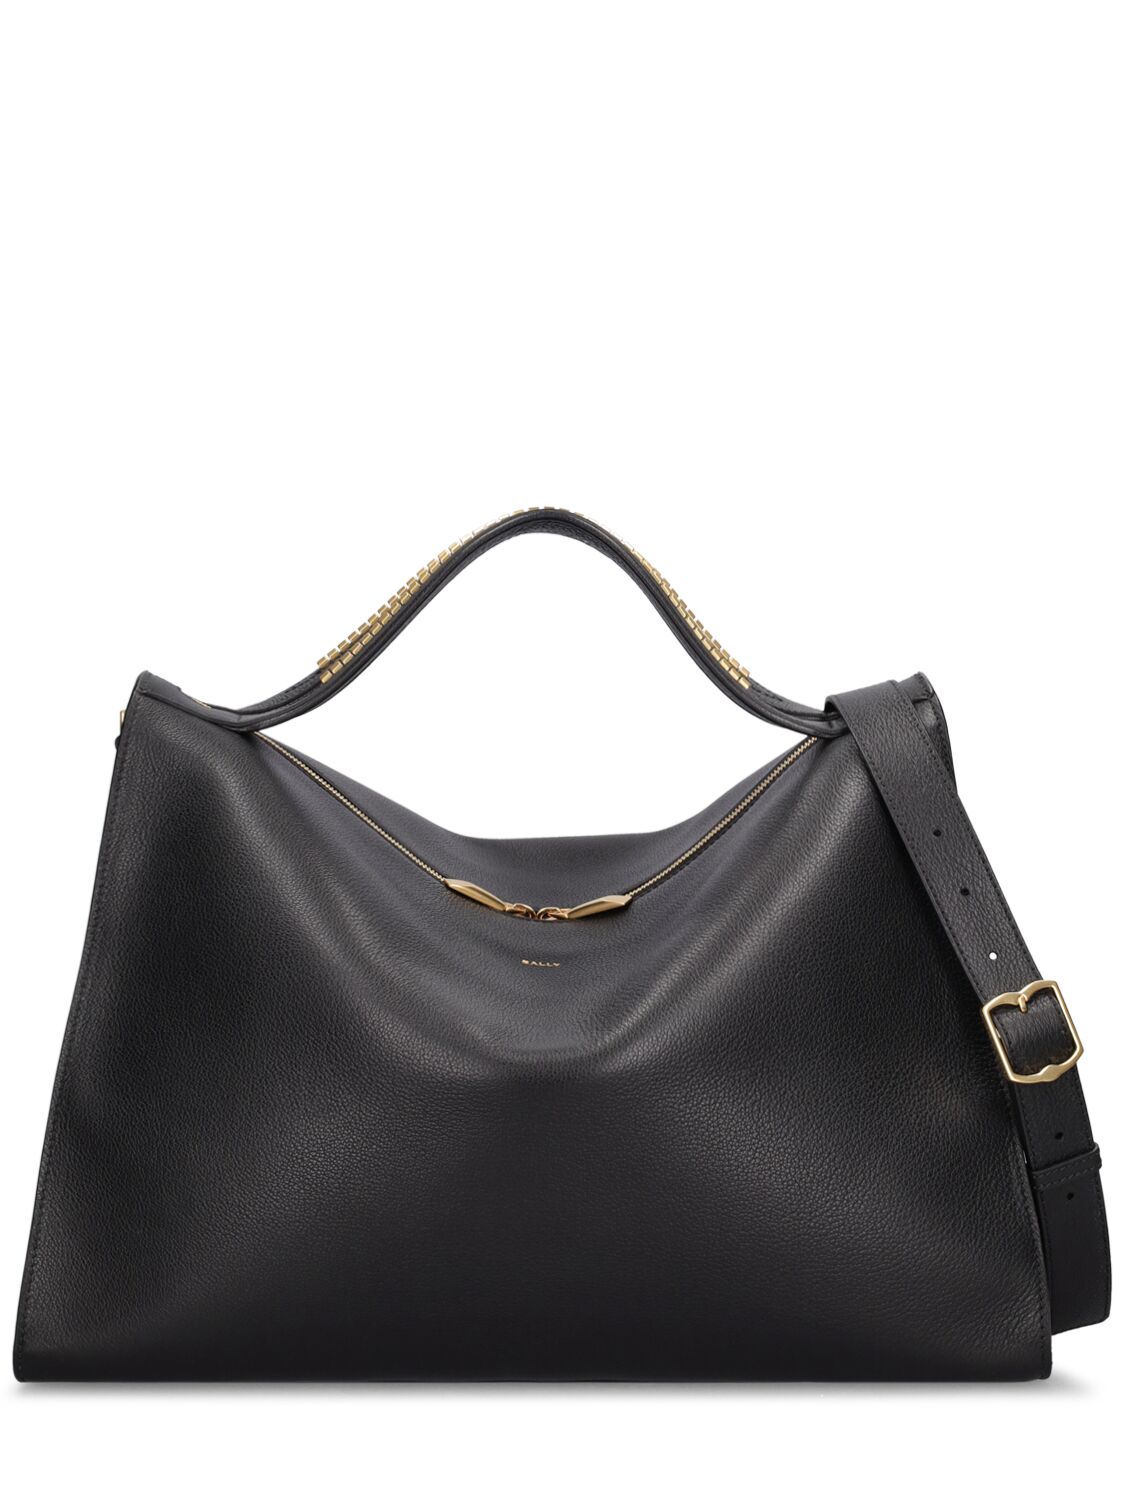 BALLY LEATHER TOTE BAG